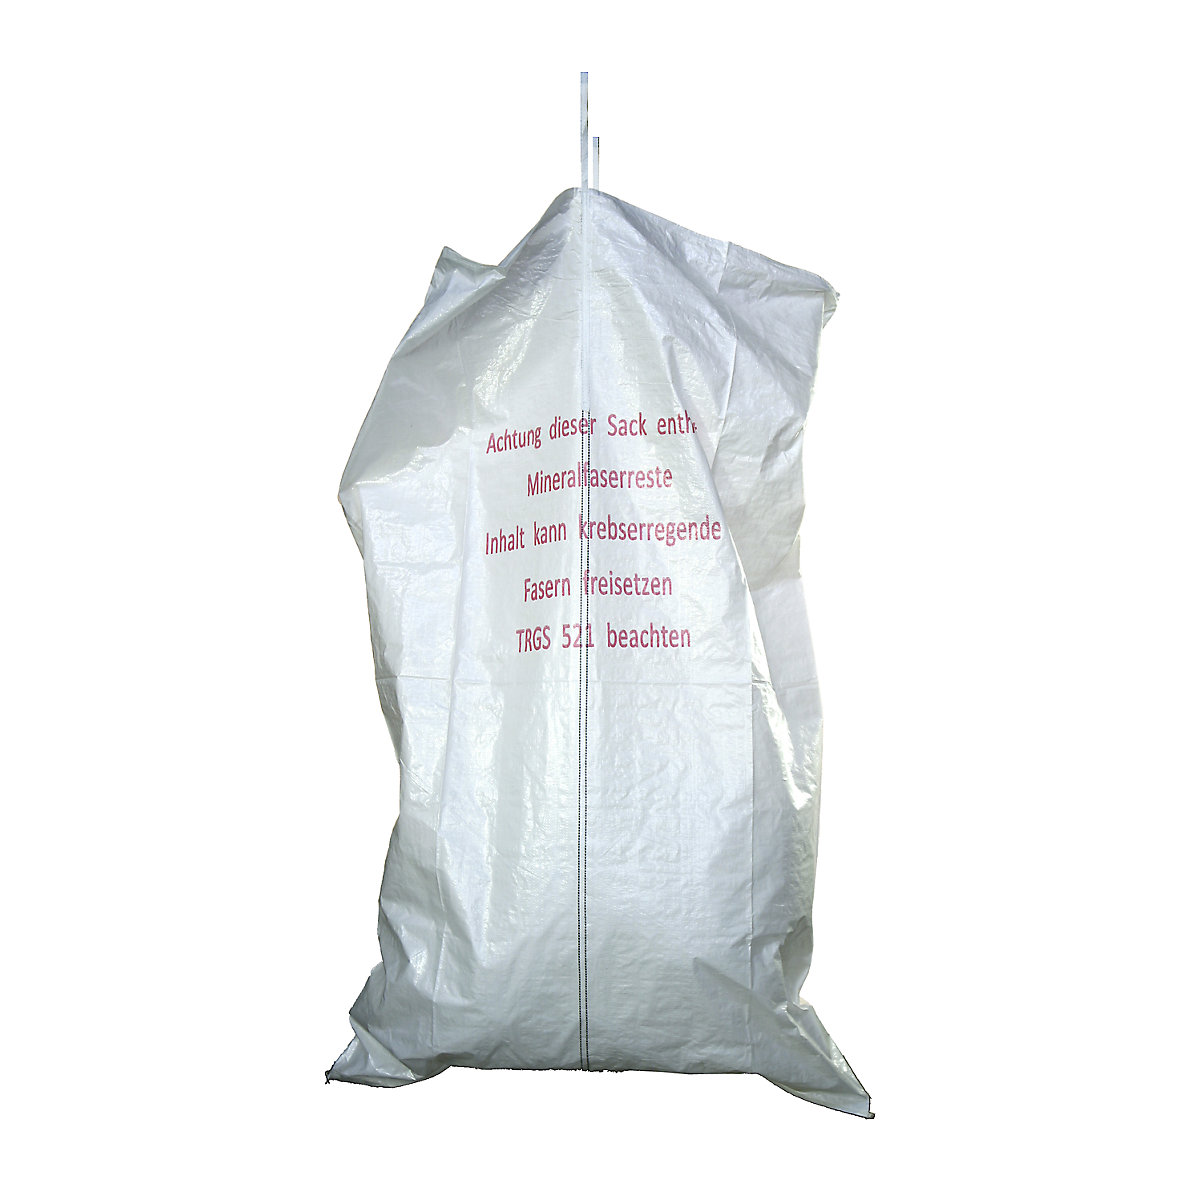 PP fabric bag, capacity 960 l, WxH 1400 x 2200 mm, coated, with lifting loops, for insulation materials containing mineral fibre, pack of 40